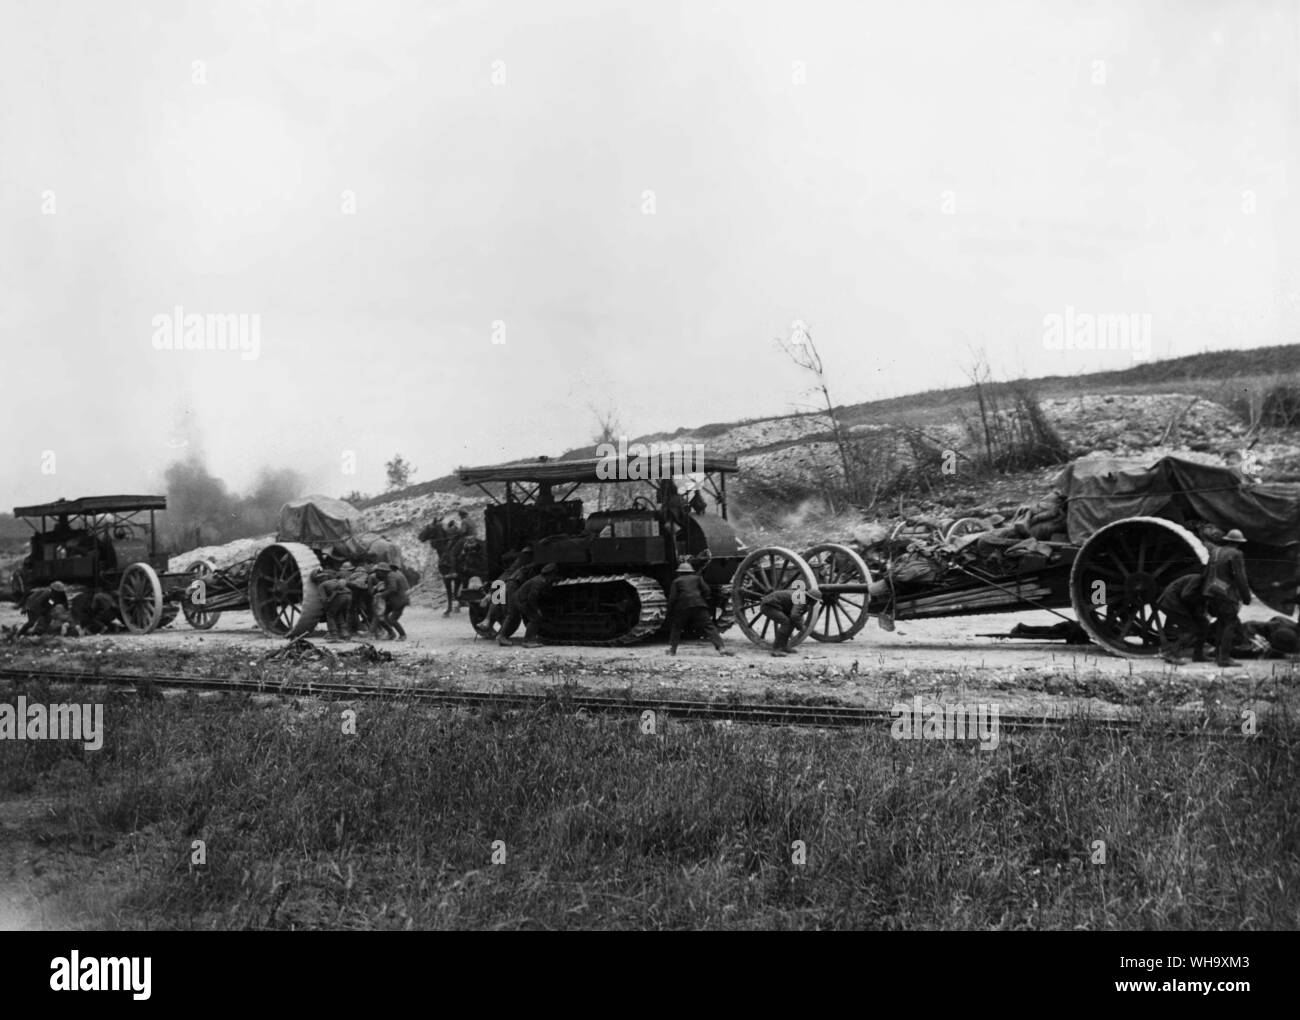 WW1: Battle of the Somme, 1916. Tractors bringing up 8-inch Howitzer guns. Soldiers taking cover behind them from shell burst seen on the far side of the road. Death Valley, near Mametz, July 1916. Stock Photo